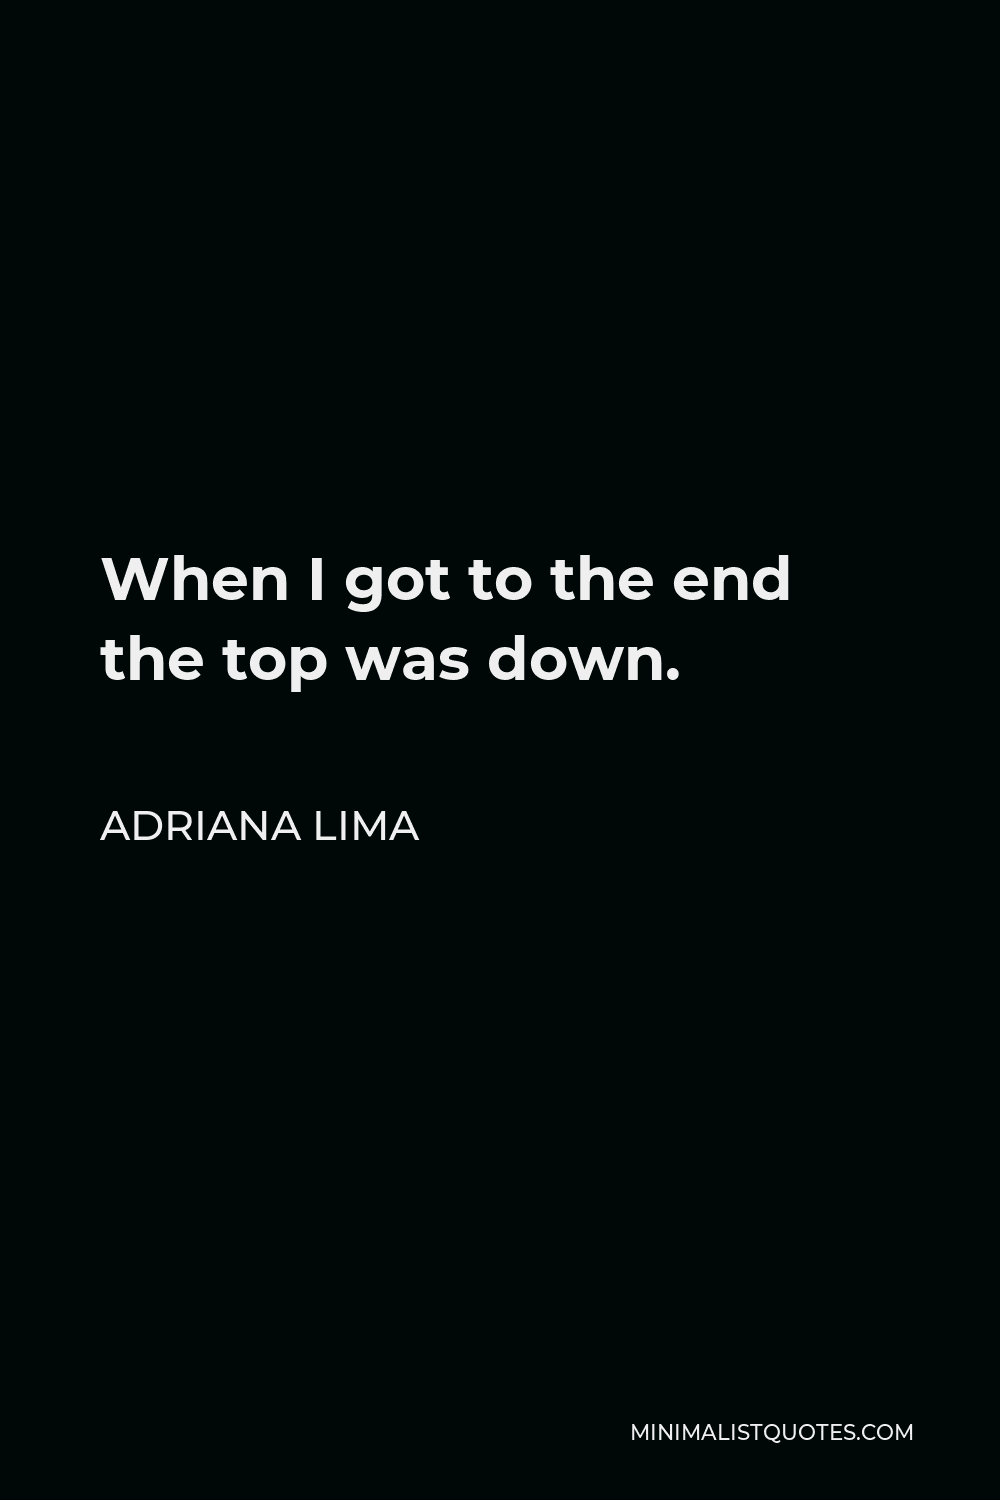 Adriana Lima Quote - When I got to the end the top was down.